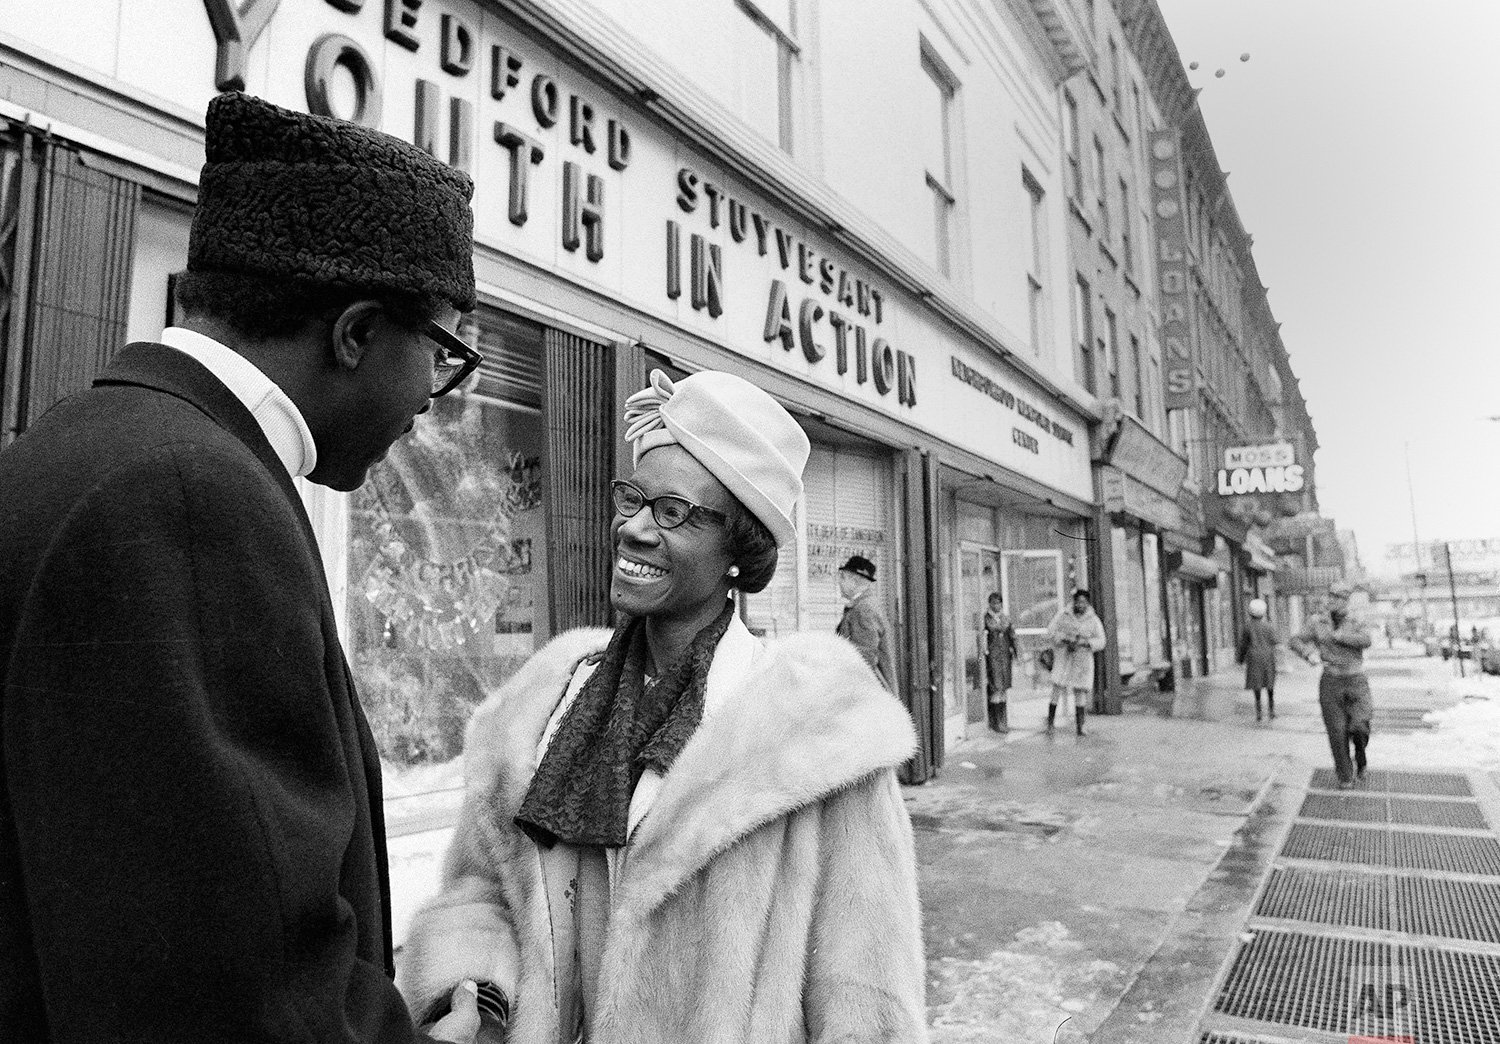  New York Assemblywoman Mrs. Shirley Chisholm has been elected to Congress to represent the 12th district of New York on Dec. 20, 1968.    Here, she talks to a constituent in the Bedford-Stuyvesant area in the heart of Brooklyn.   (AP Photo/John Duri